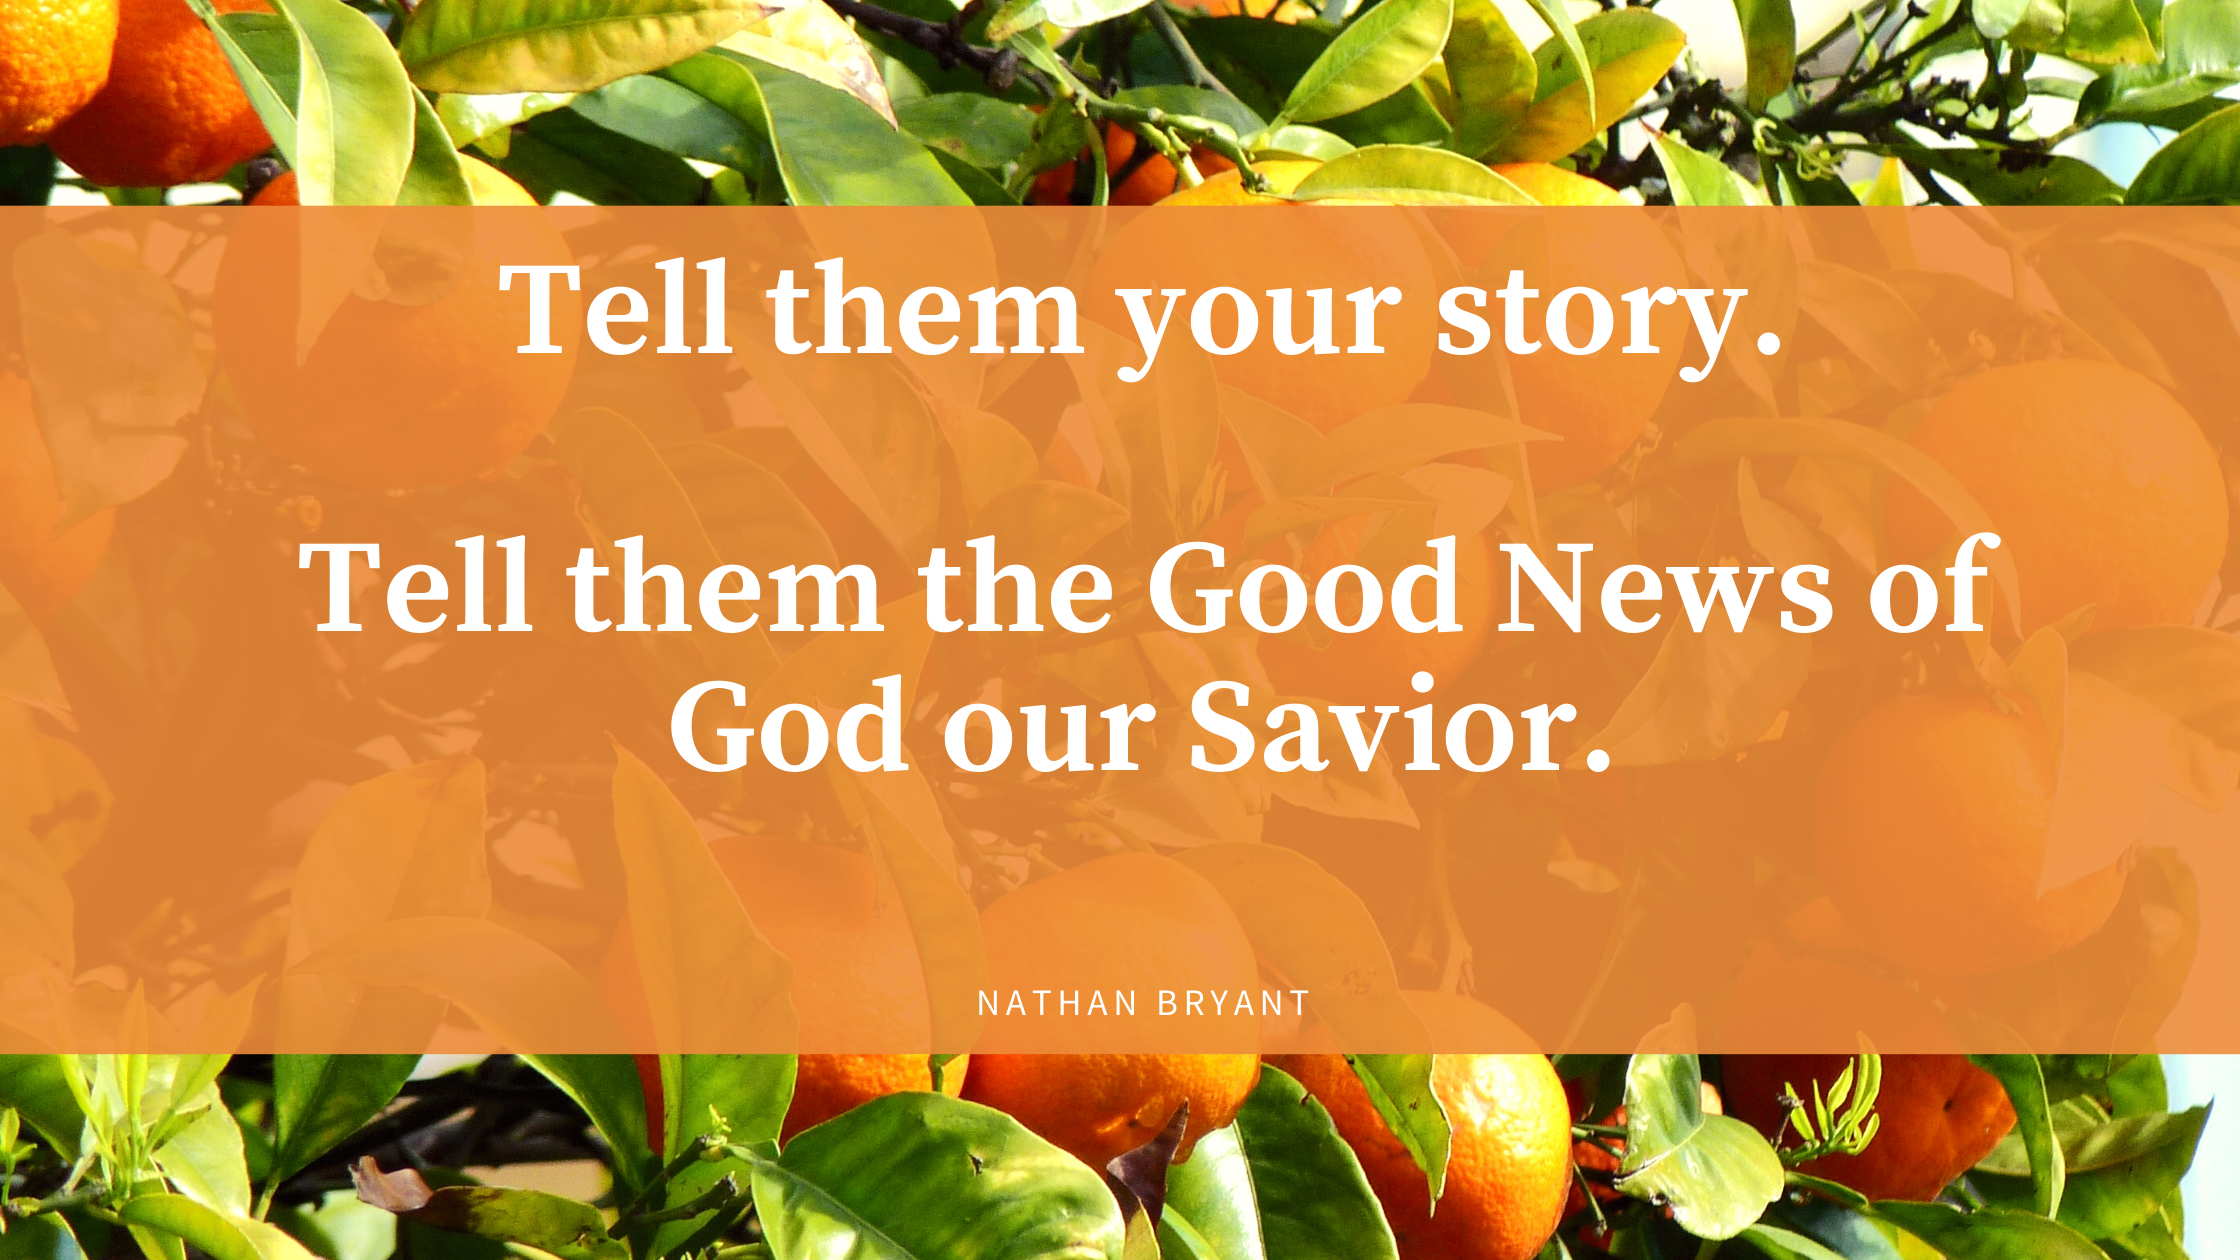 Tell them your story, tell them the Good News of God our Savior.